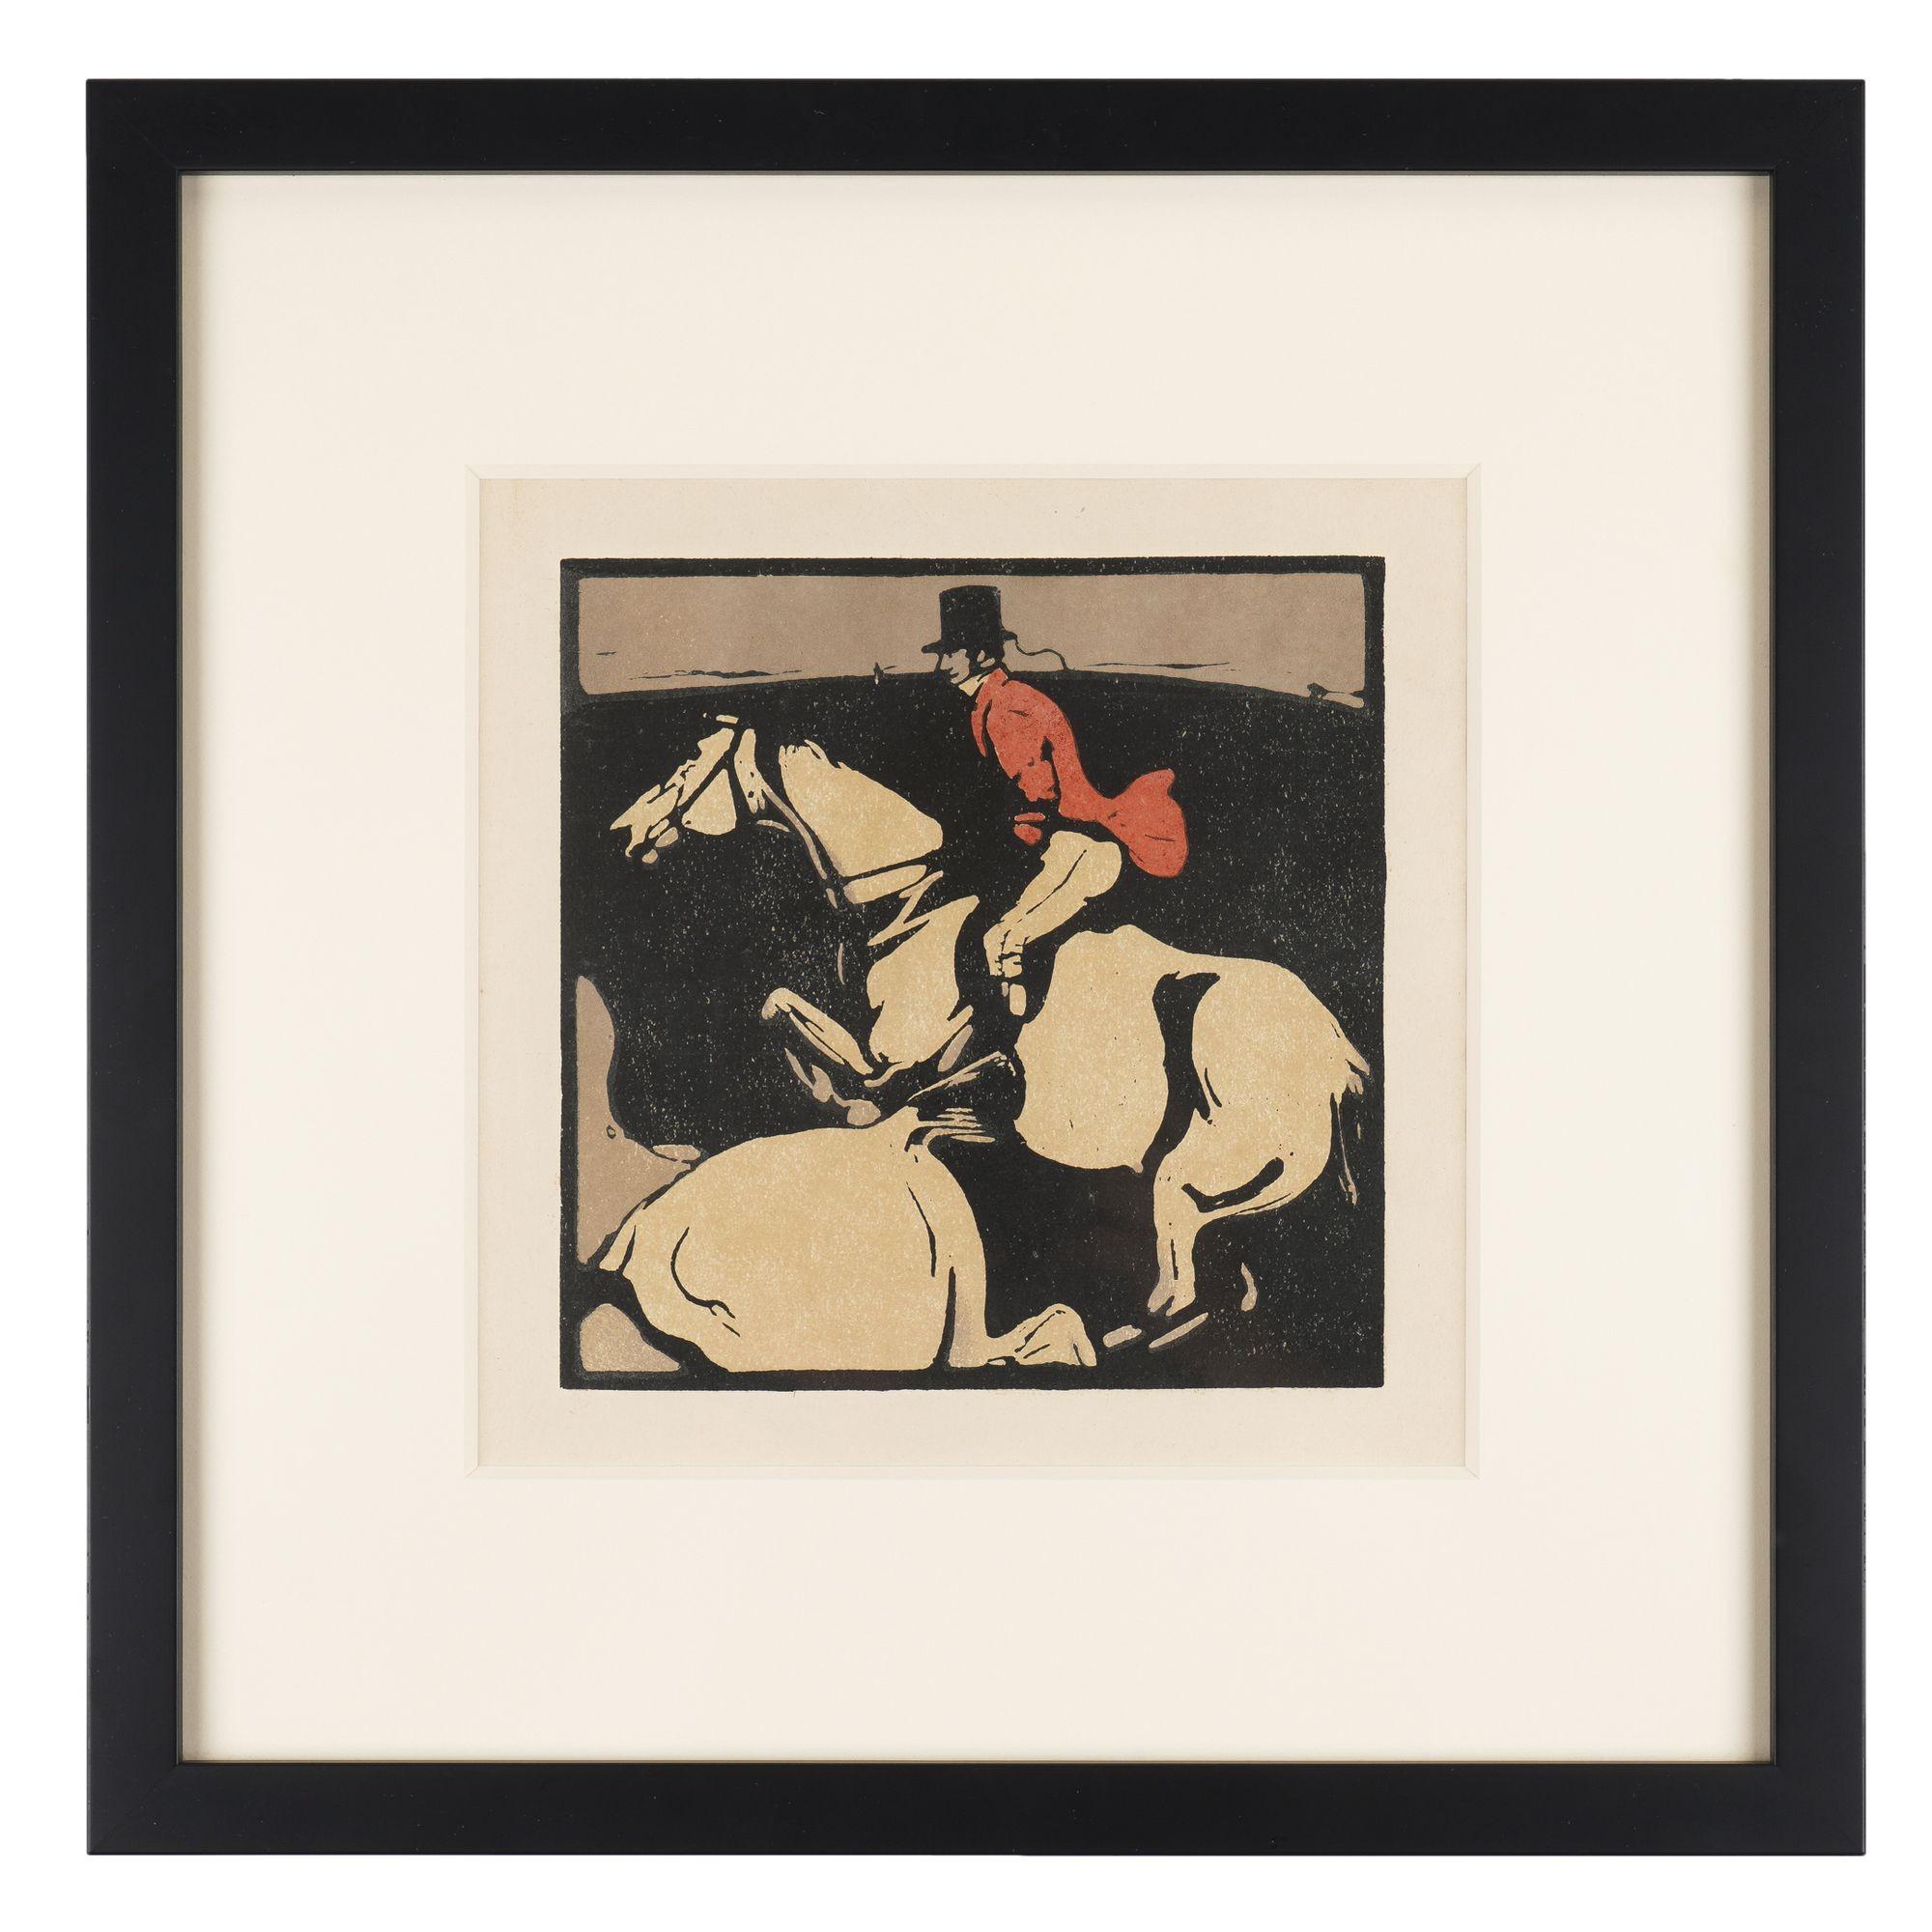 Four prints from “An Almanac of Twelve Sports” by William Nicholson, 1898 For Sale 2